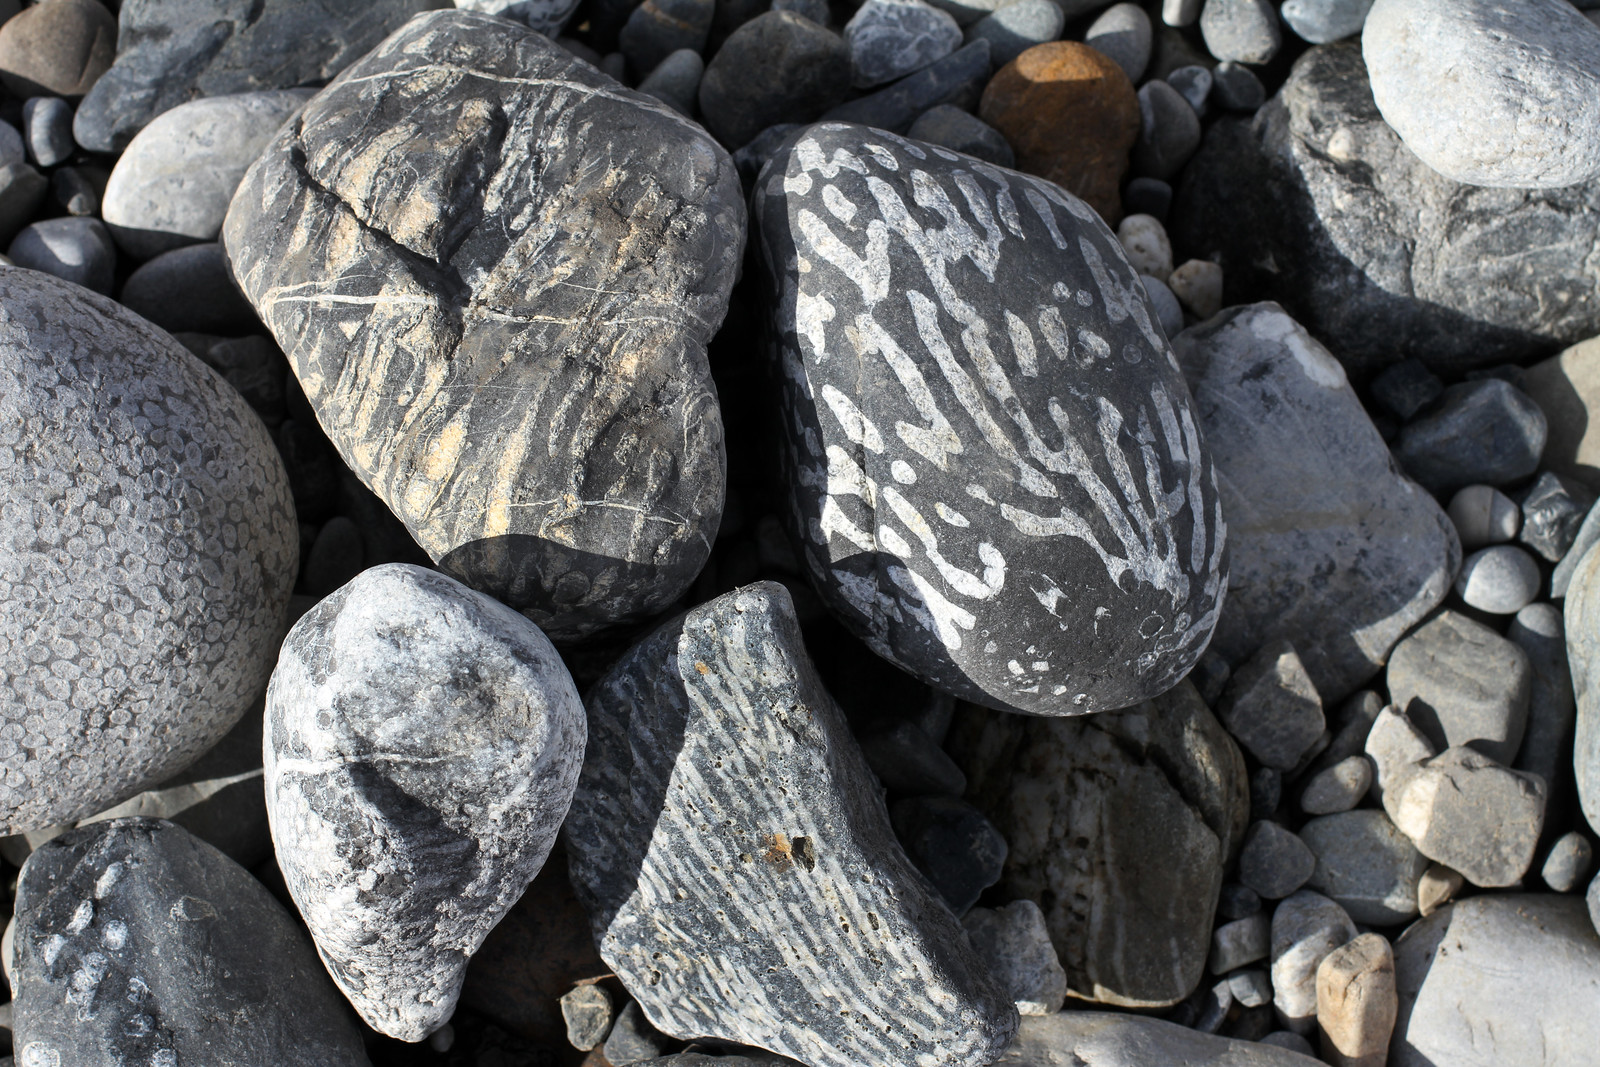 Photograph of dark gray, rounded stones on a beach with white fossils corals embedded in them. The corals mainly look like elongated white streaks or lines. In one case, the coral looks like closely packed white circles.